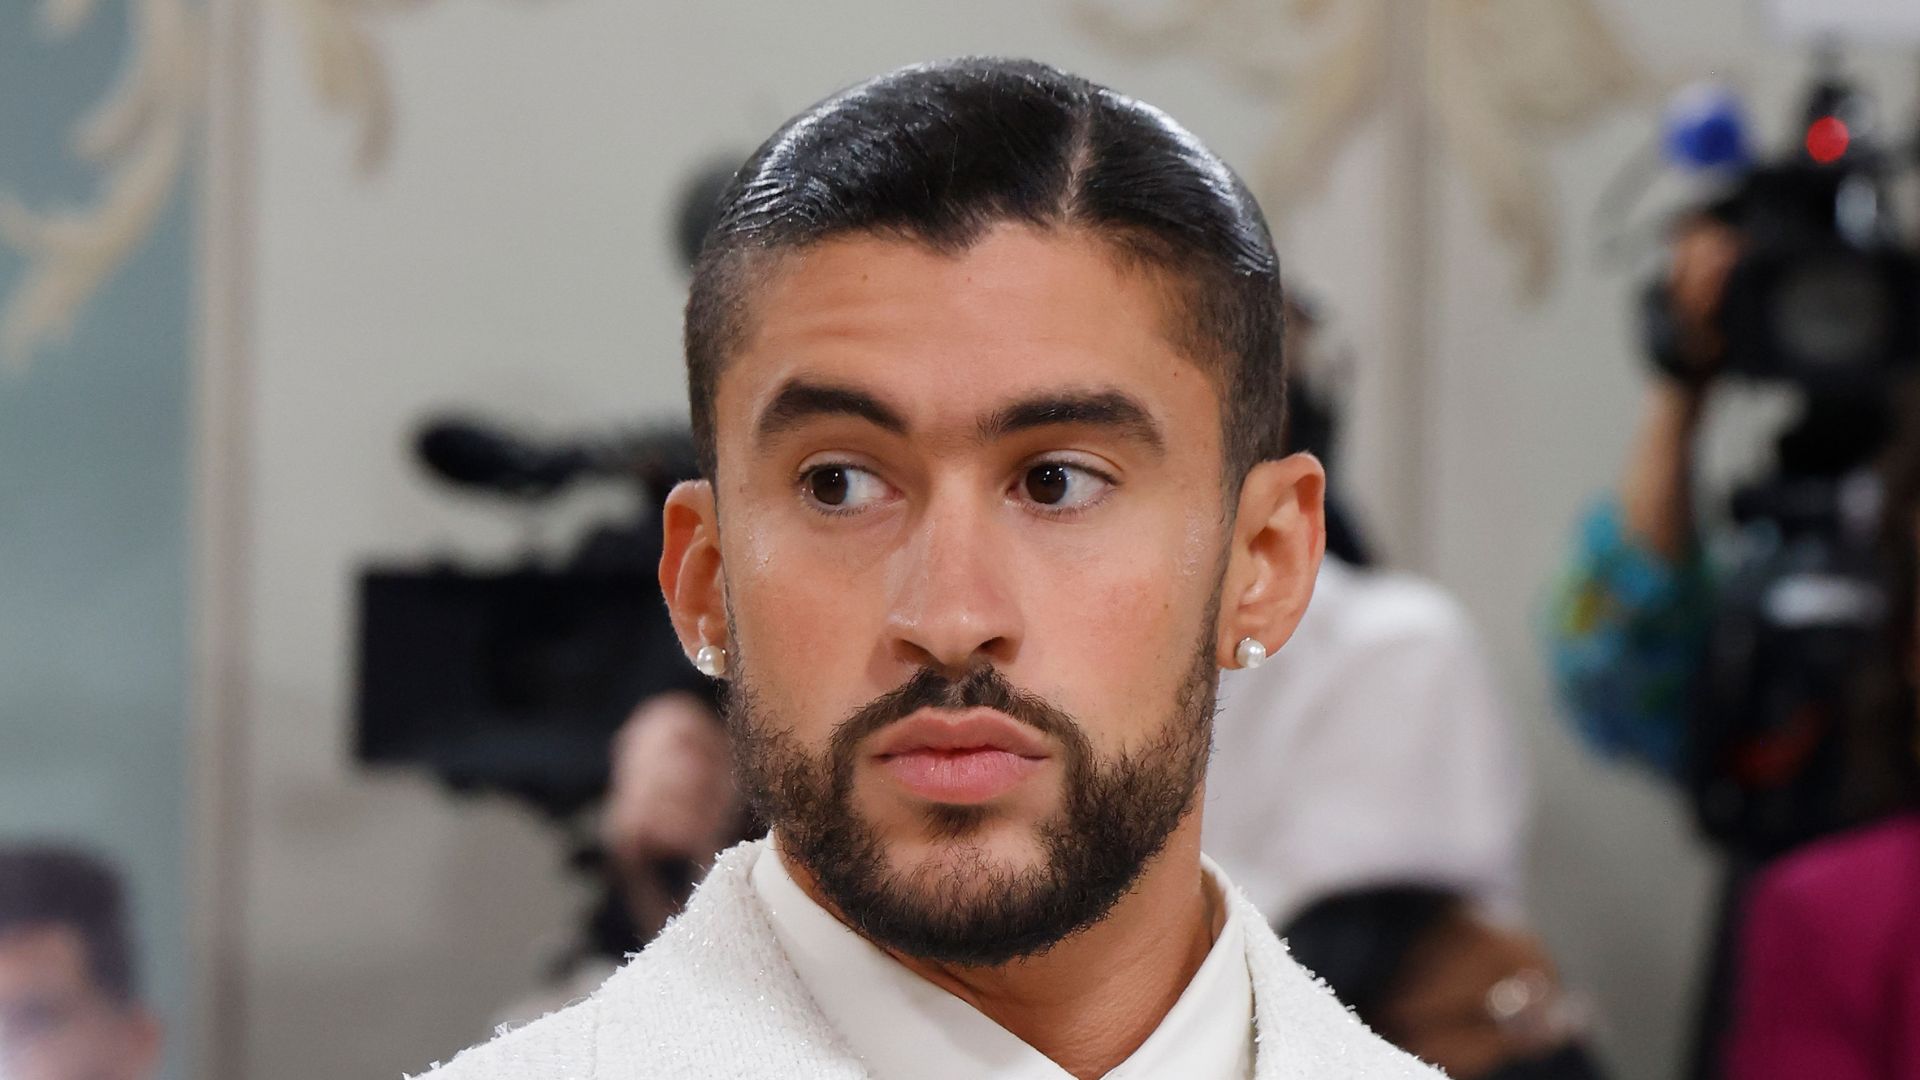 10 Hairstyles For Men That Will Never Go Out Of Fashion - avernearn